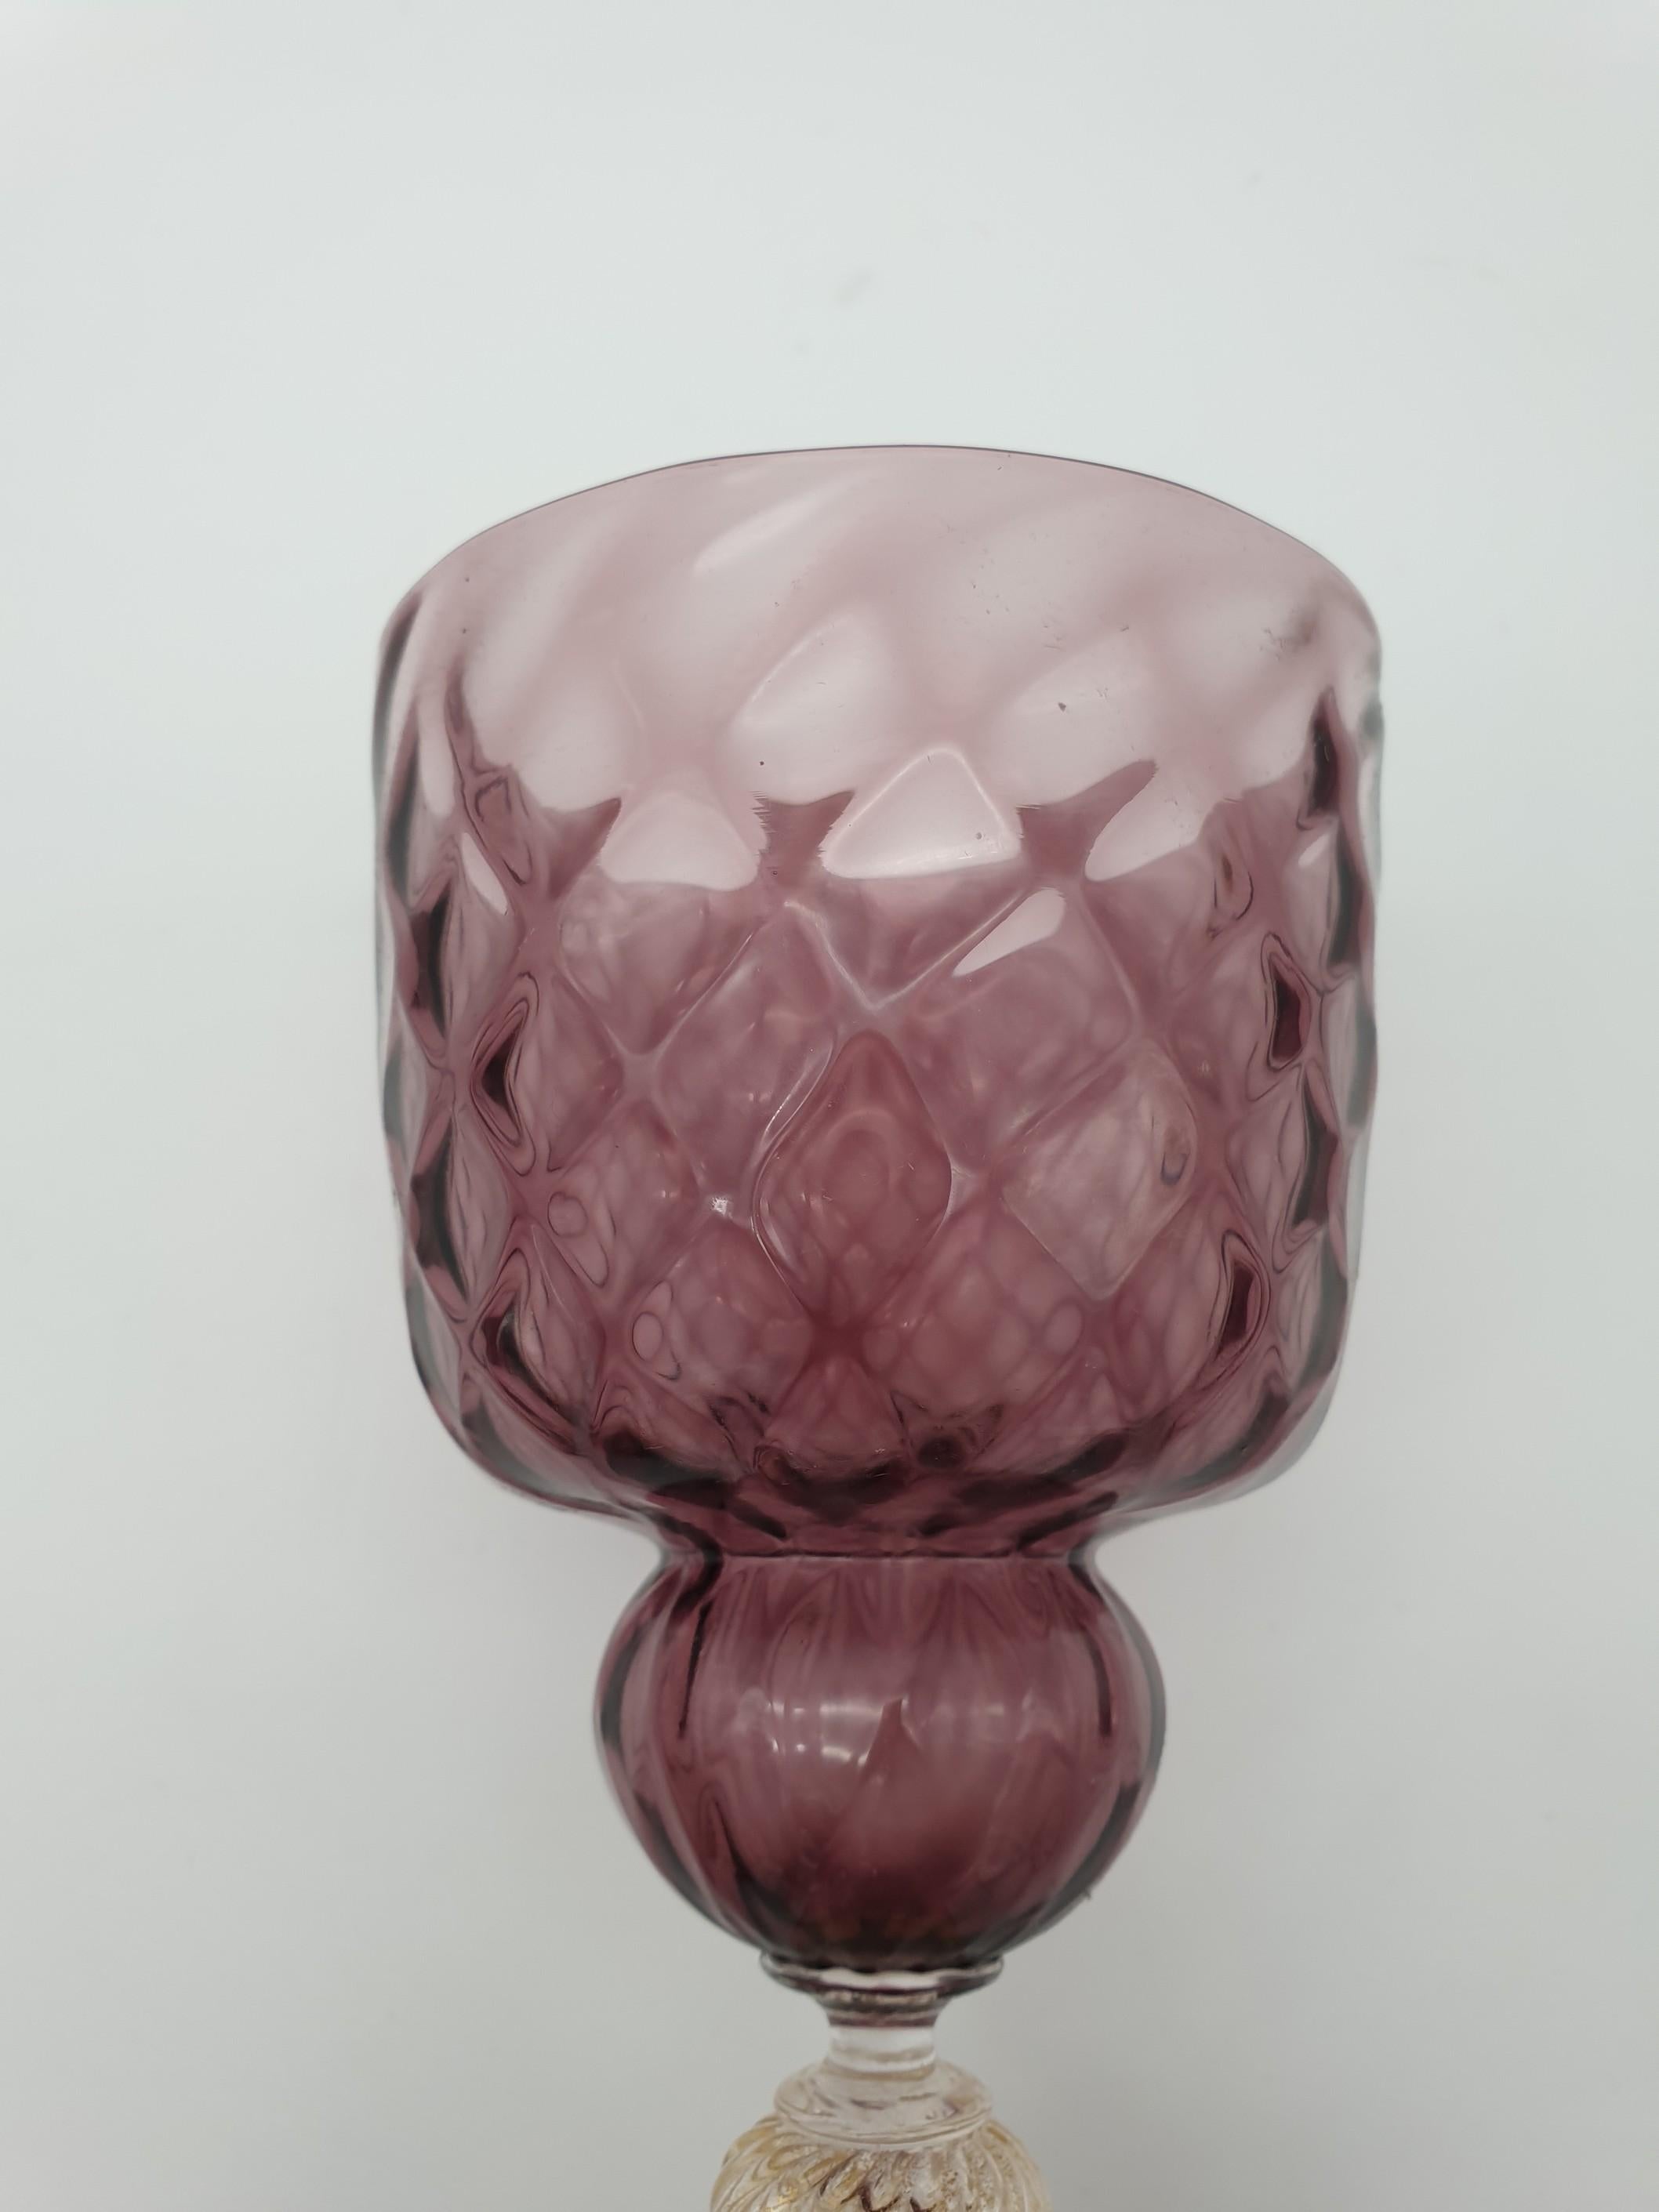 Pair of Modern Murano Glass Goblets by Gino Cenedese, Red & Amethyst, Late 1990s For Sale 2